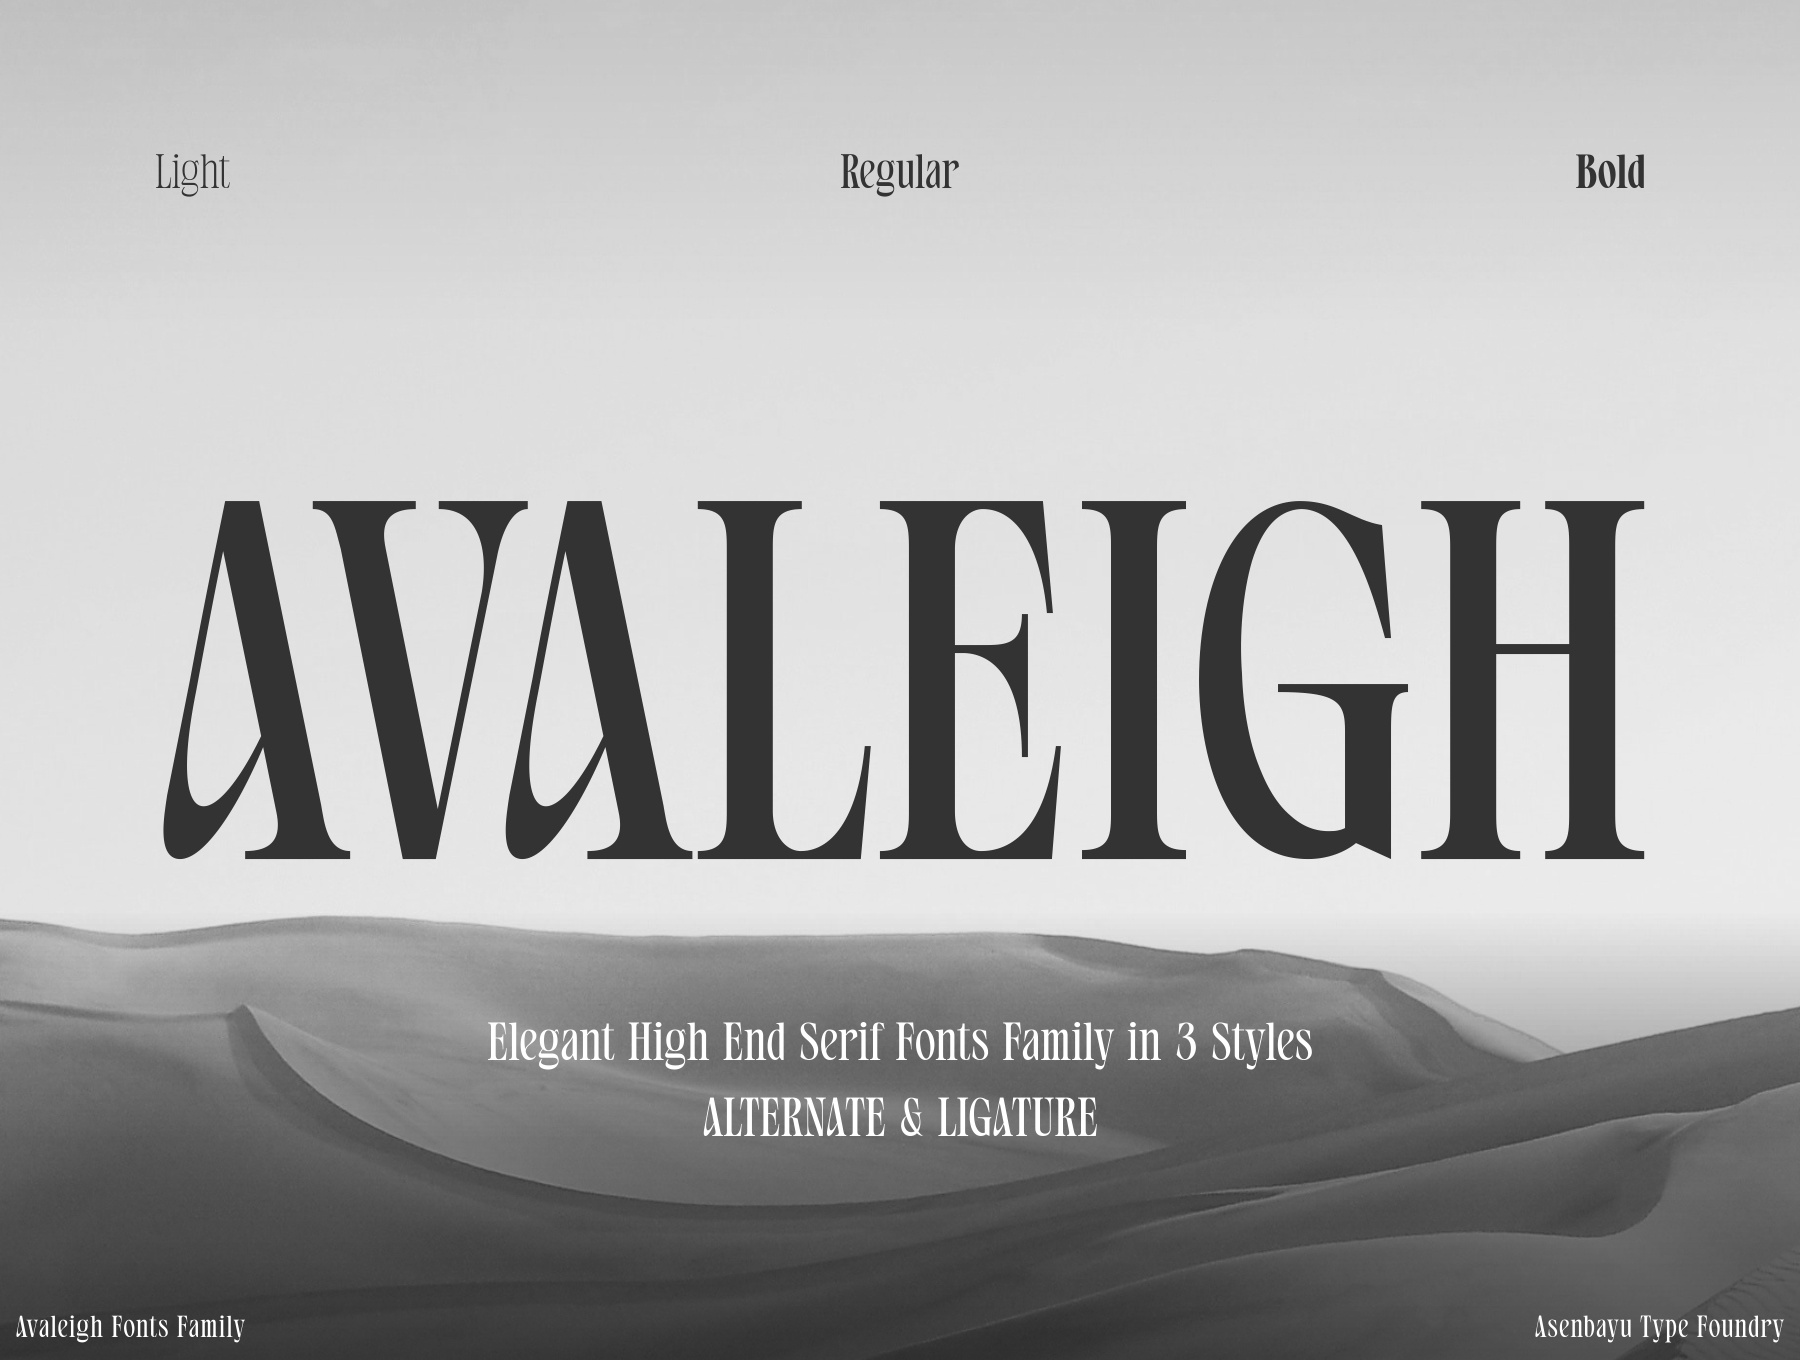 Font Avaleigh